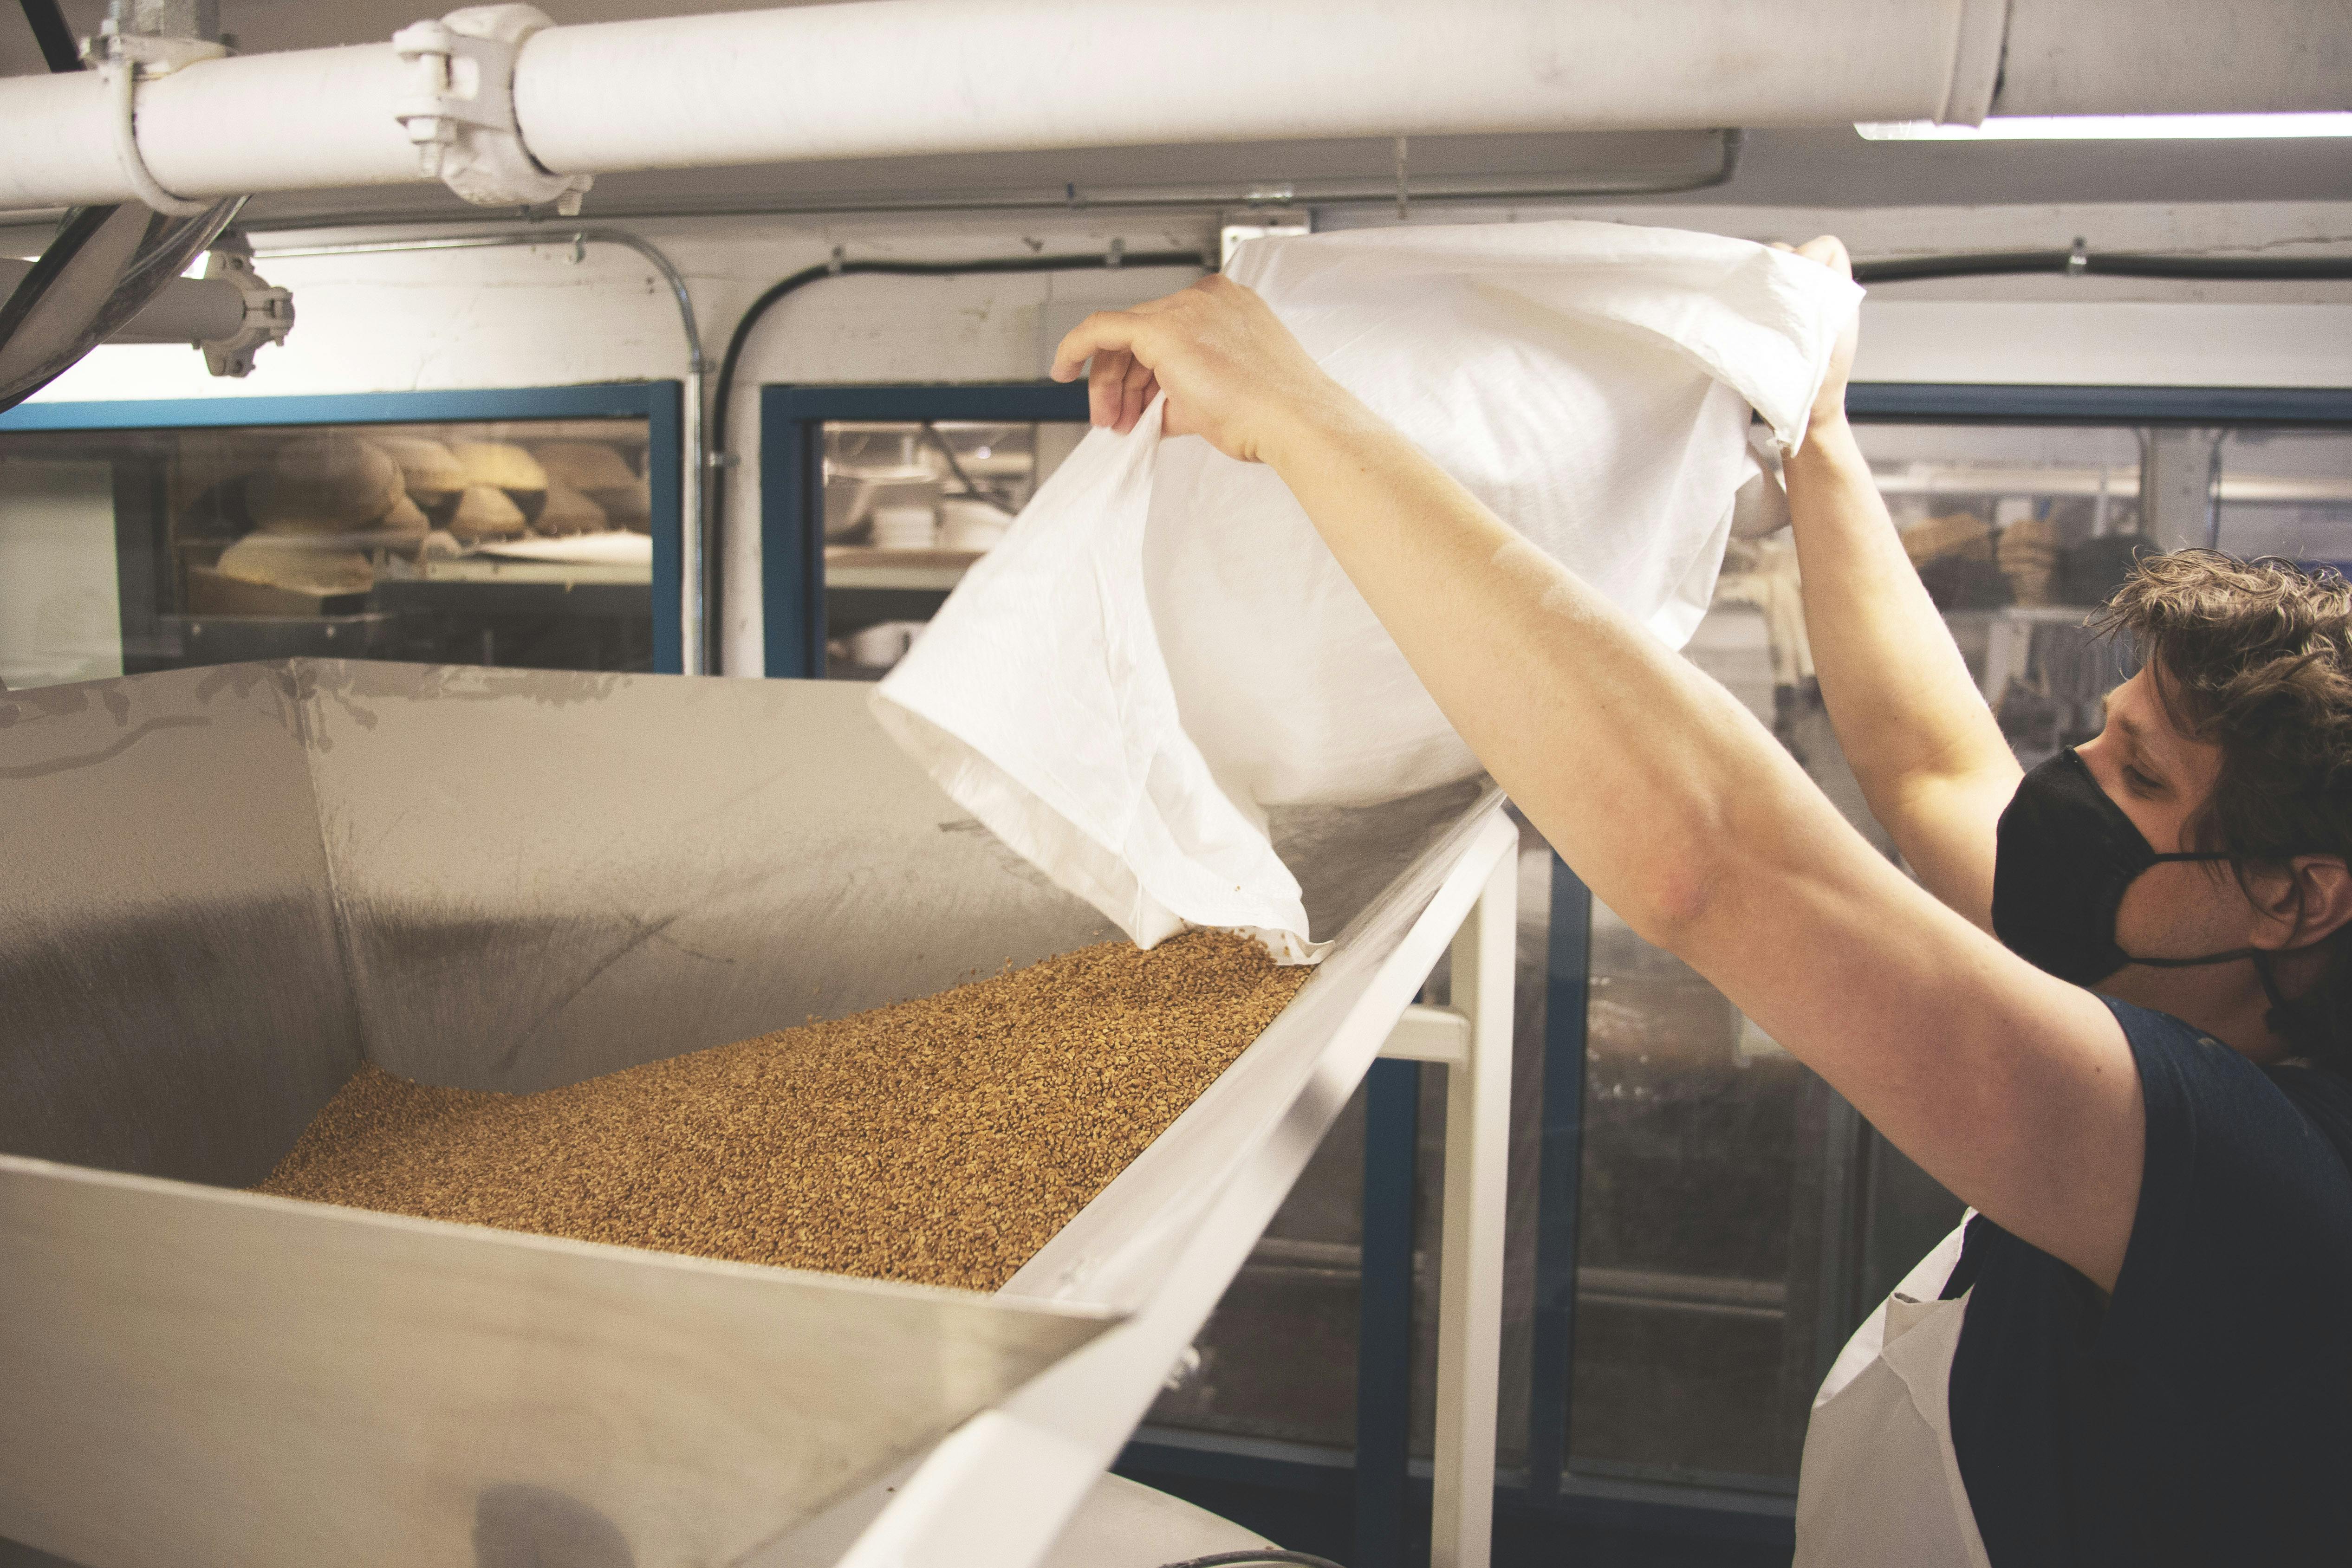 Whole grains being poured into the top of the flour mill